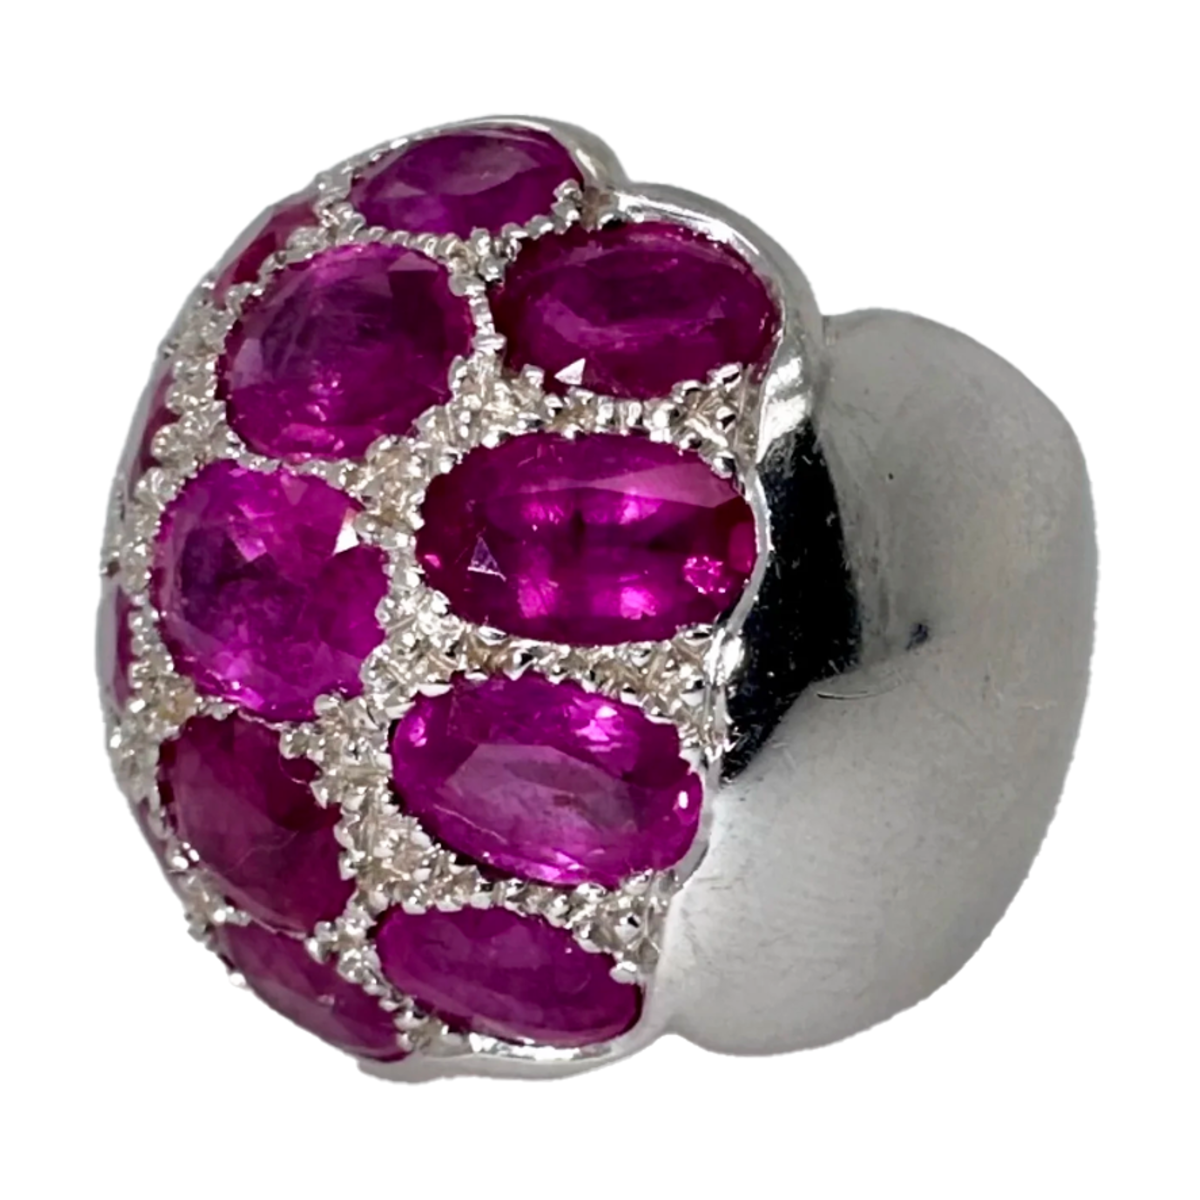 René Boivin 1980s 18KT White Gold Pink Sapphire Ring front view